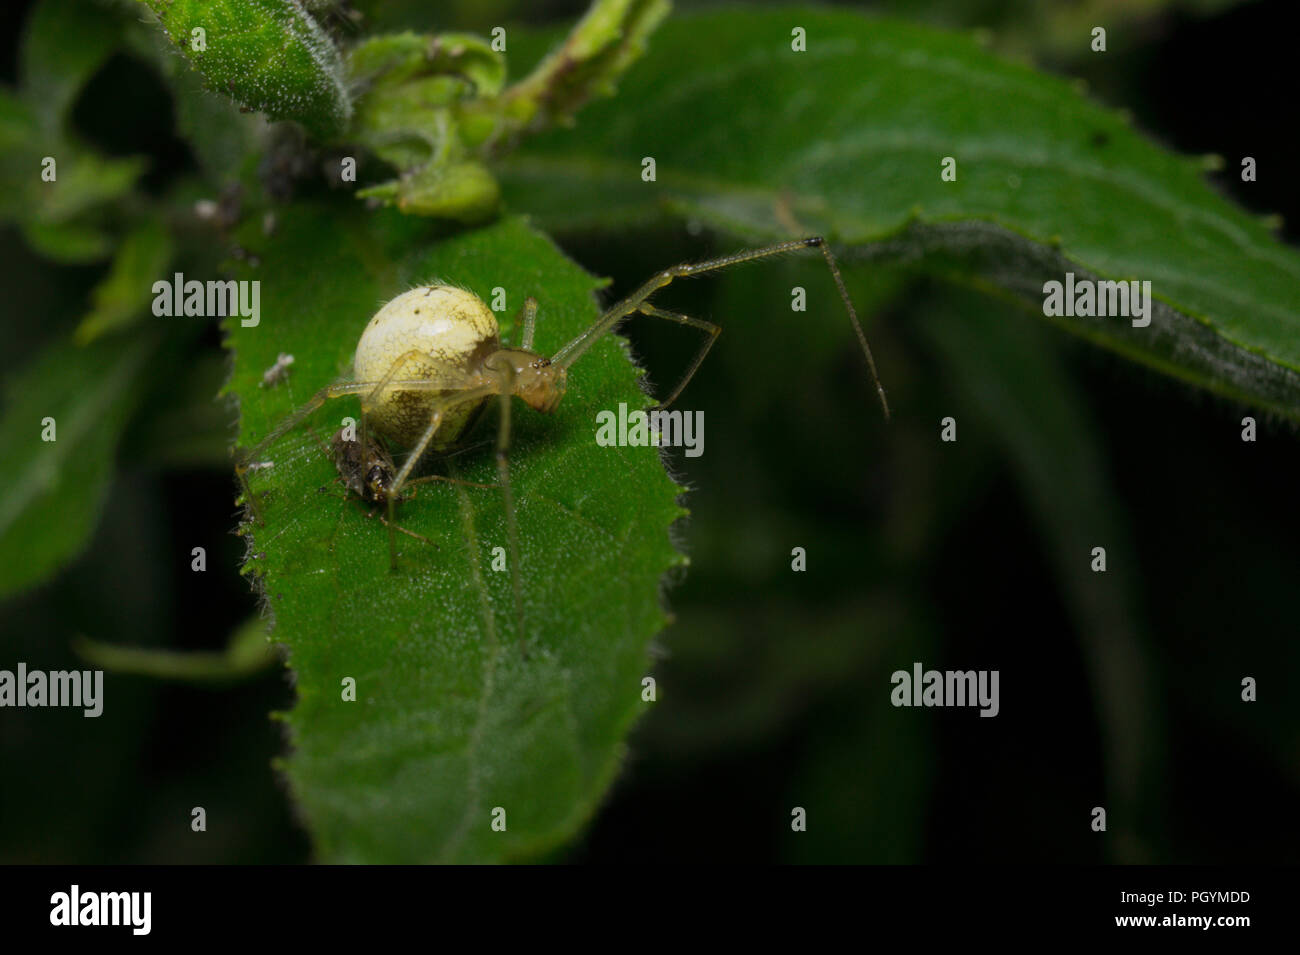 A young white orb-weaving spider guarding her prey - a bug, tied down to a leaf y spider-silk. Detailed image with dark green and black background. Stock Photo